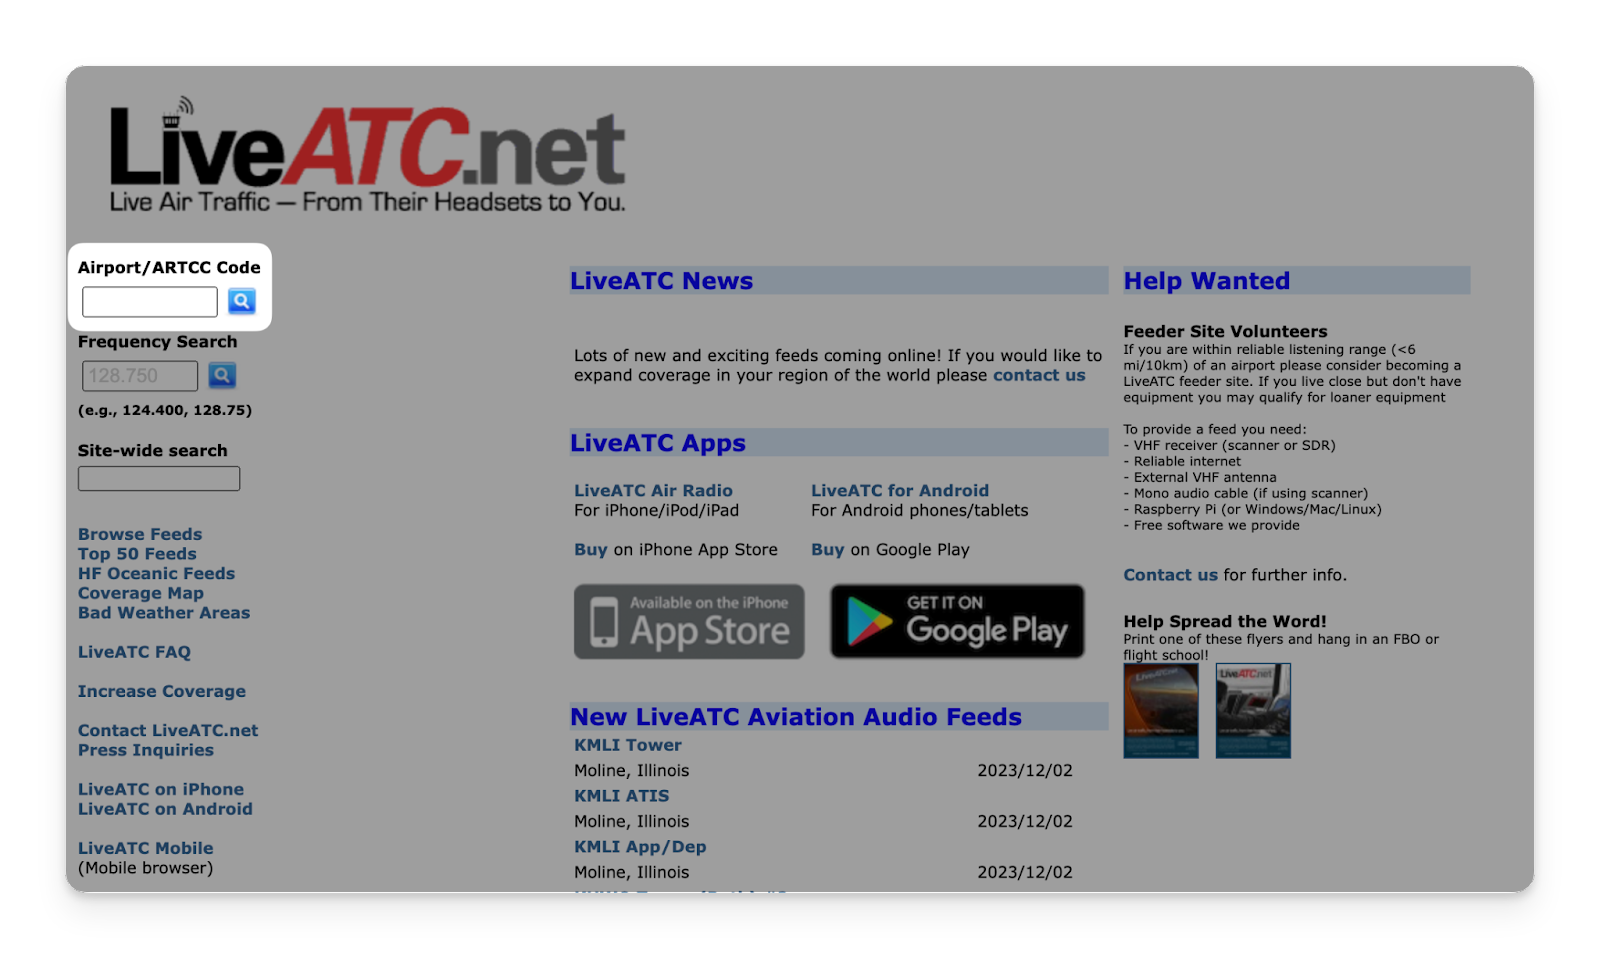 A screenshot of the LiveATC website with the Airport/ARTCC Code section highlighted.